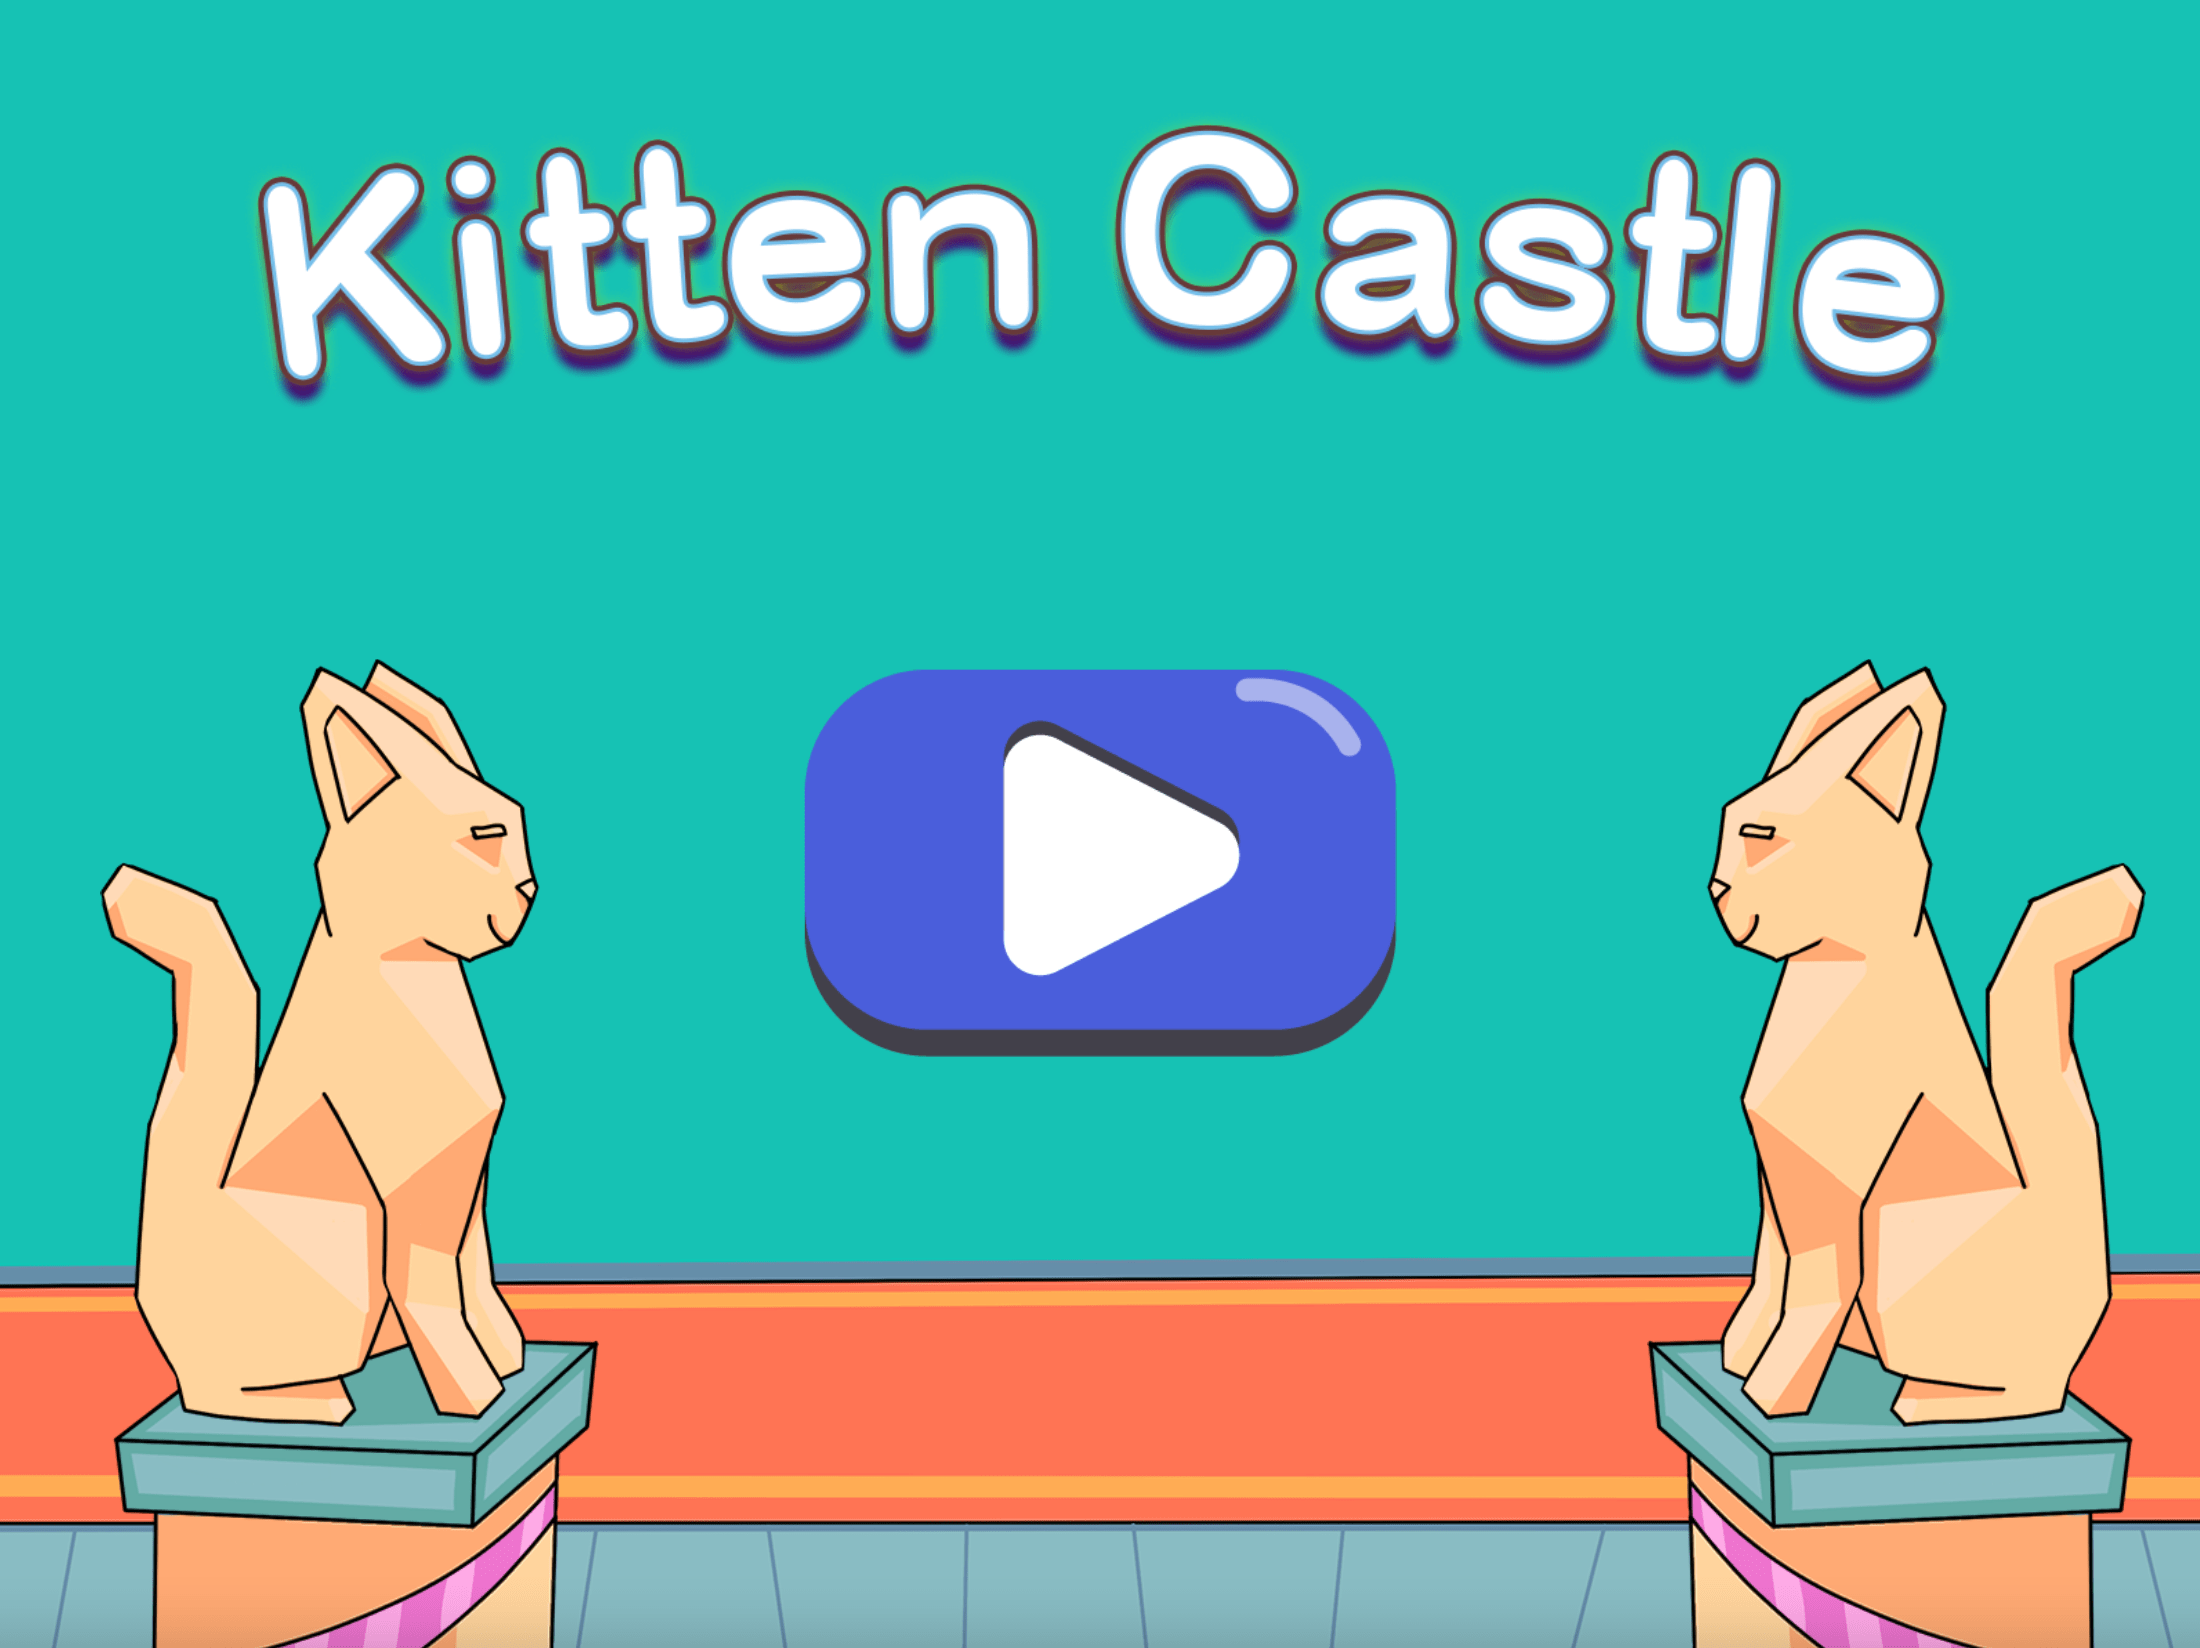 Game title screen featuring two cat statues and a play button.